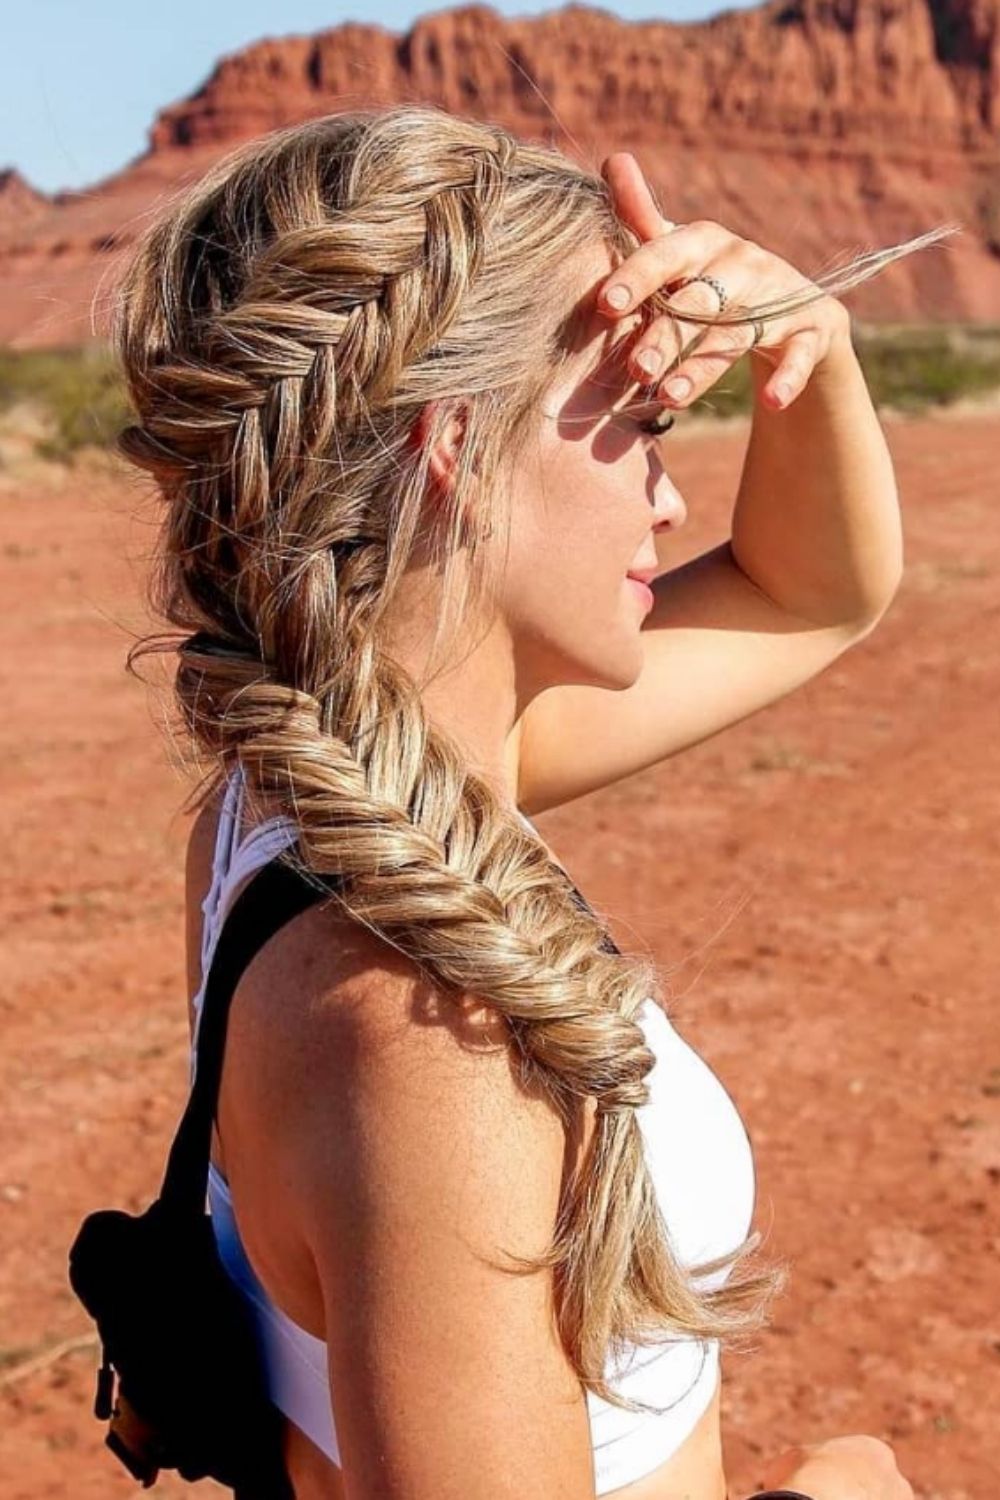 Side Braid Hairstyles | the best long hairstyle for prom or any occasion